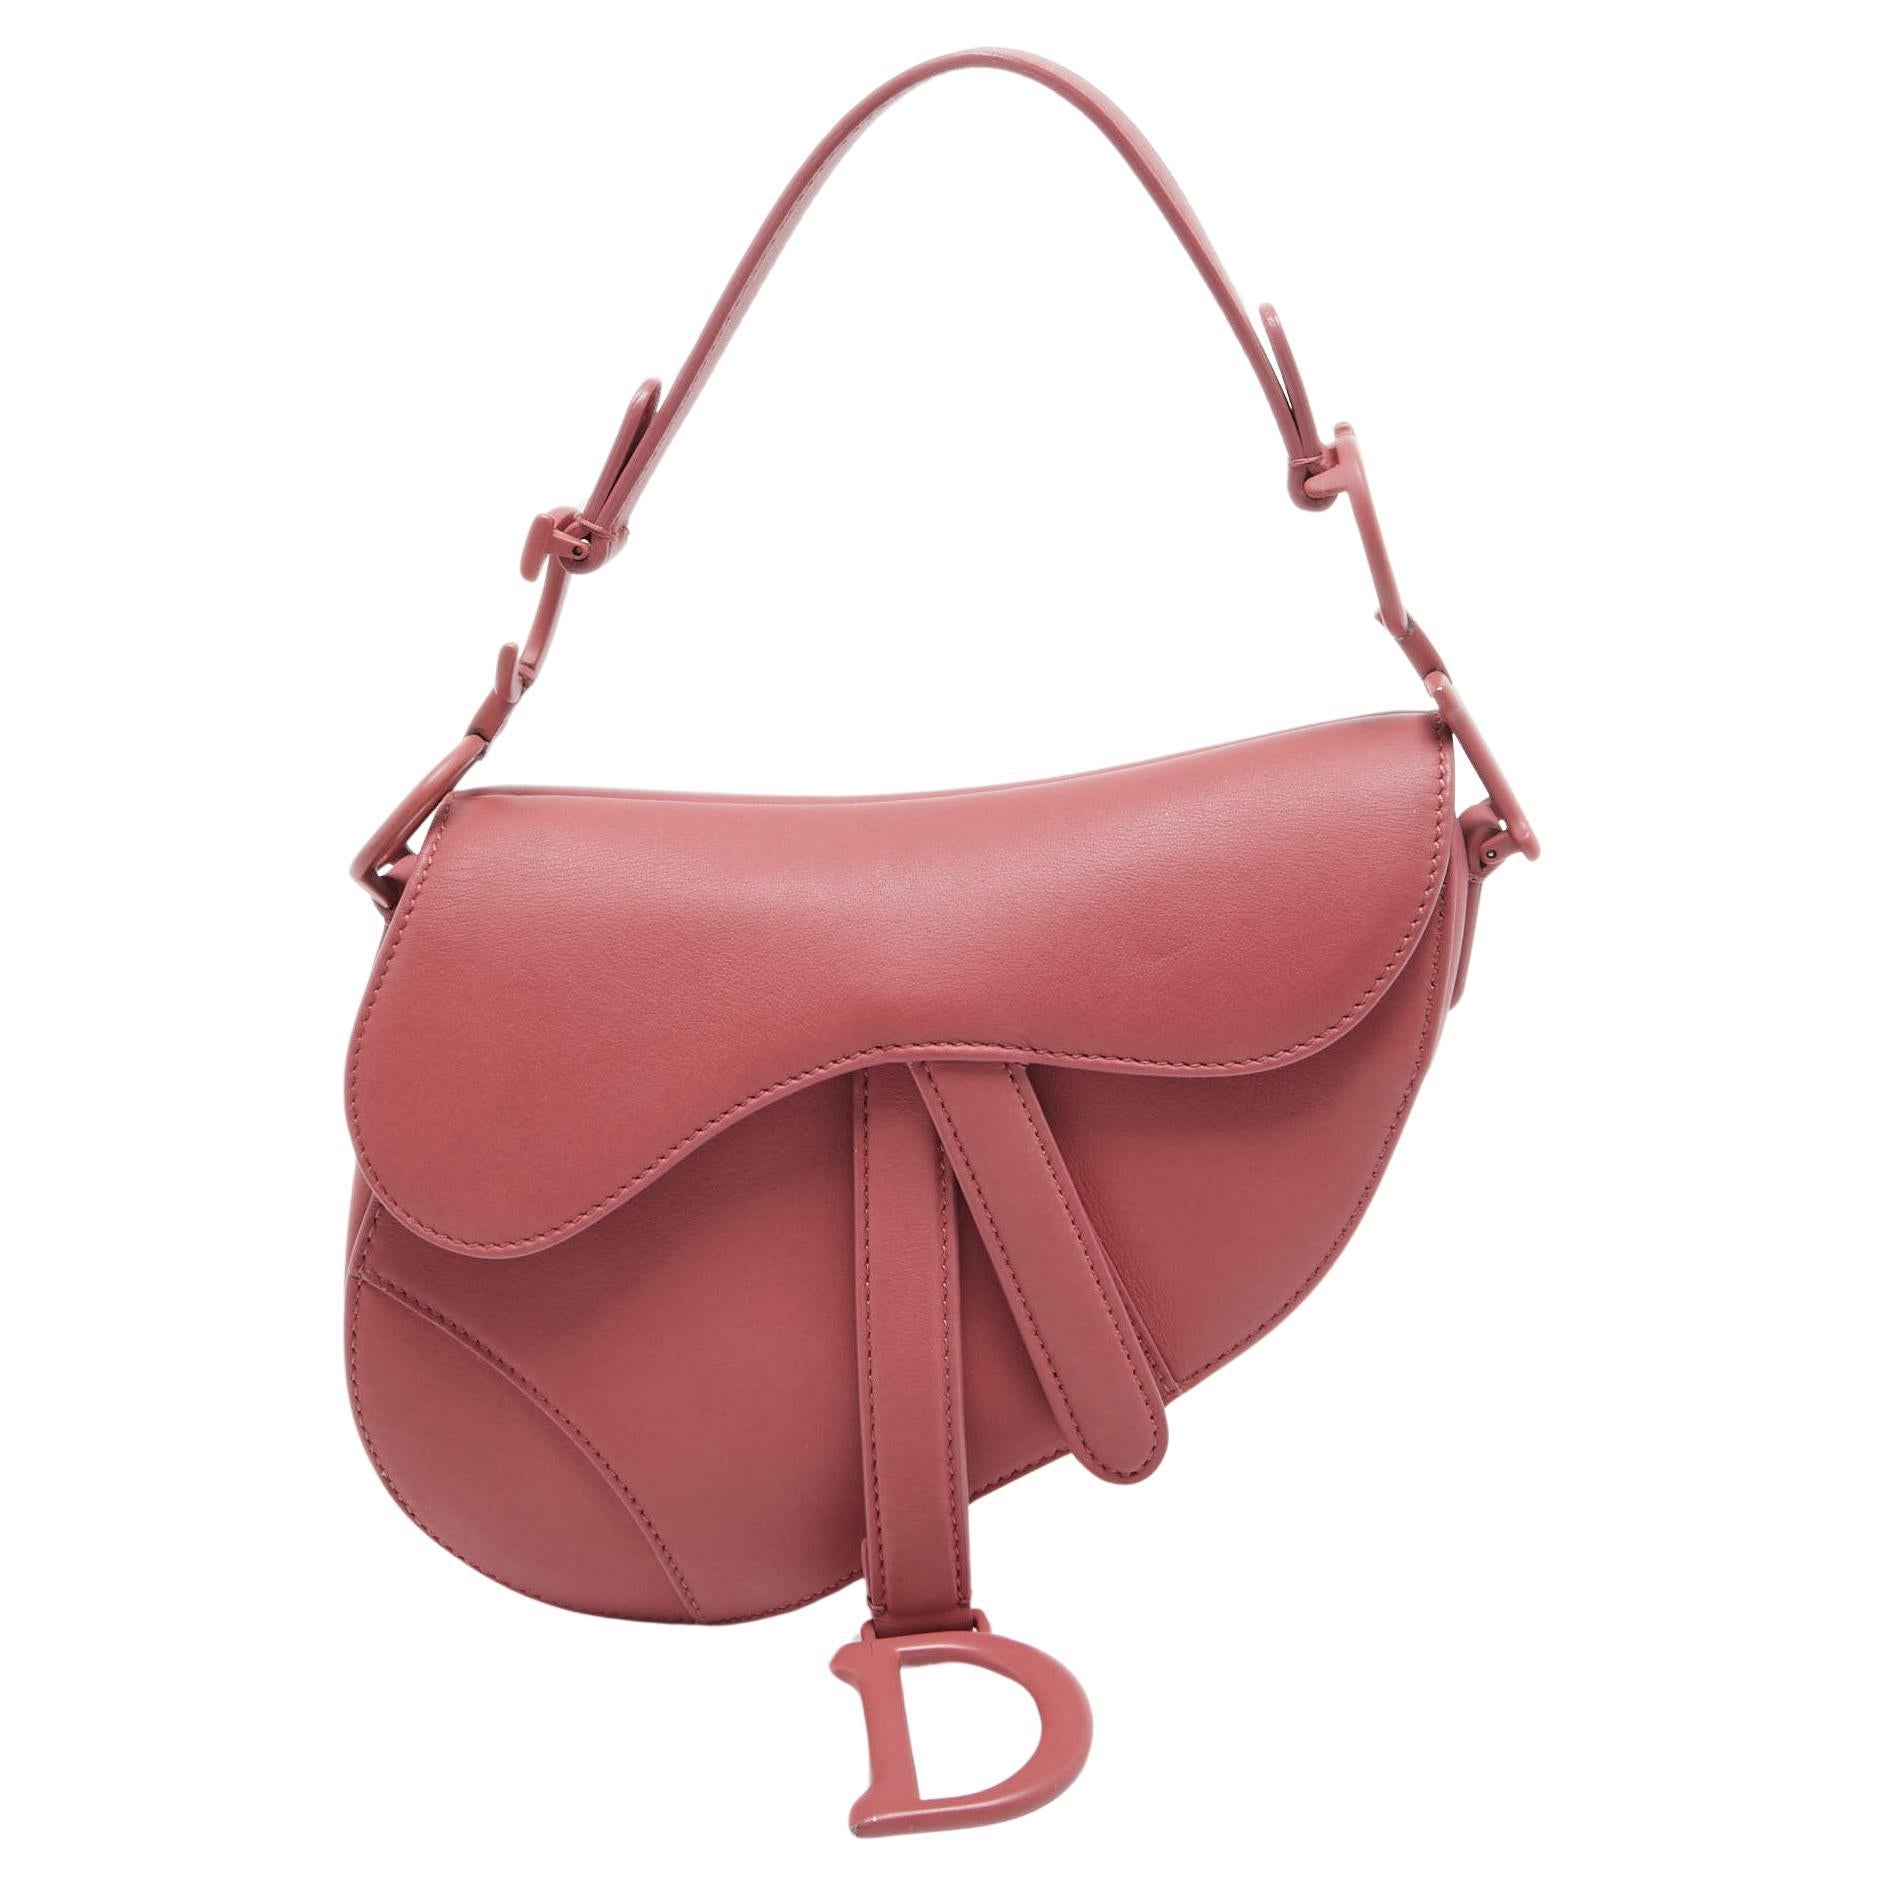 Does Dior saddle bag comes with a strap?